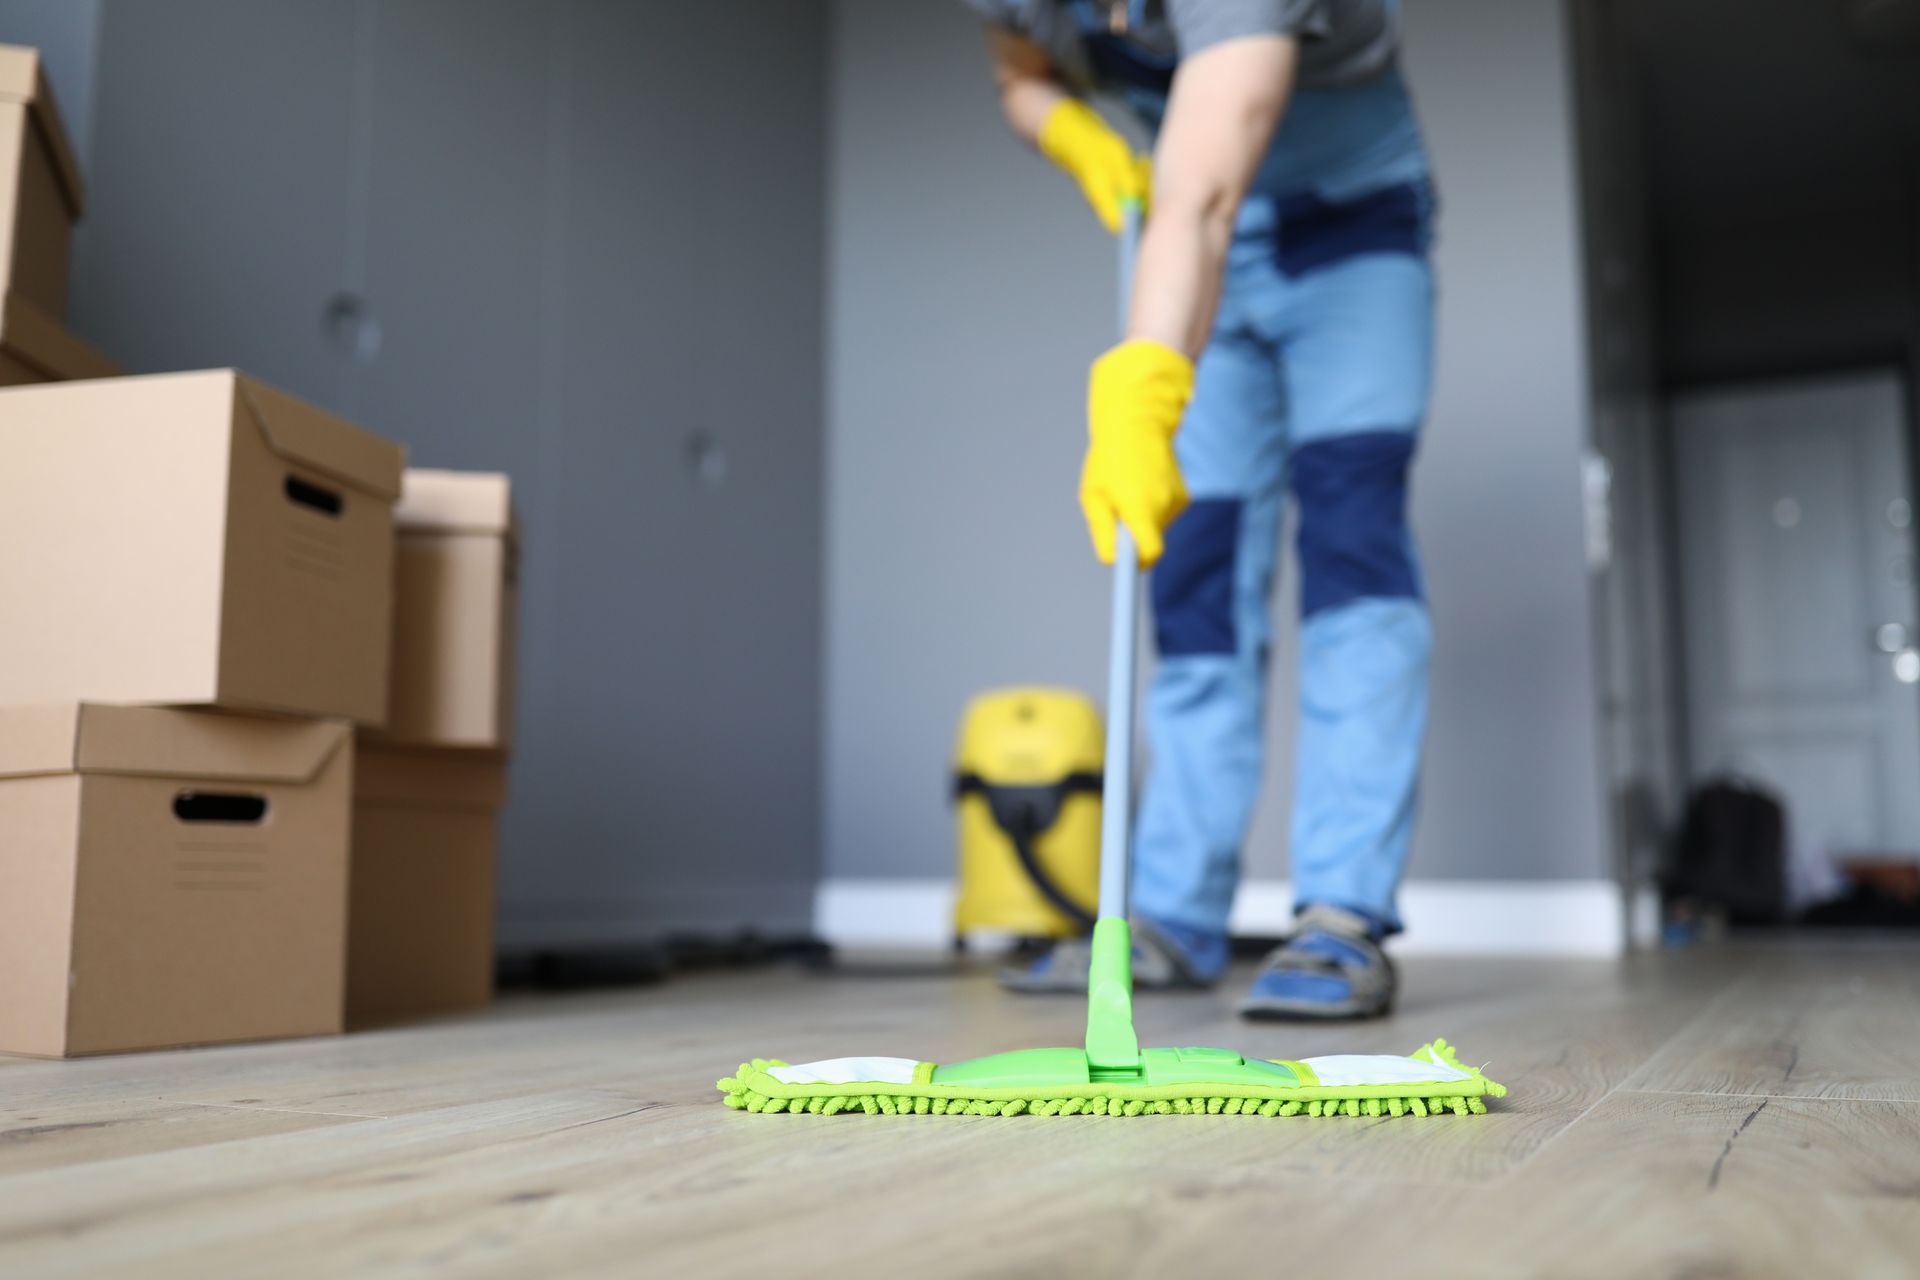 A man is cleaning the floor with a mop in a room.